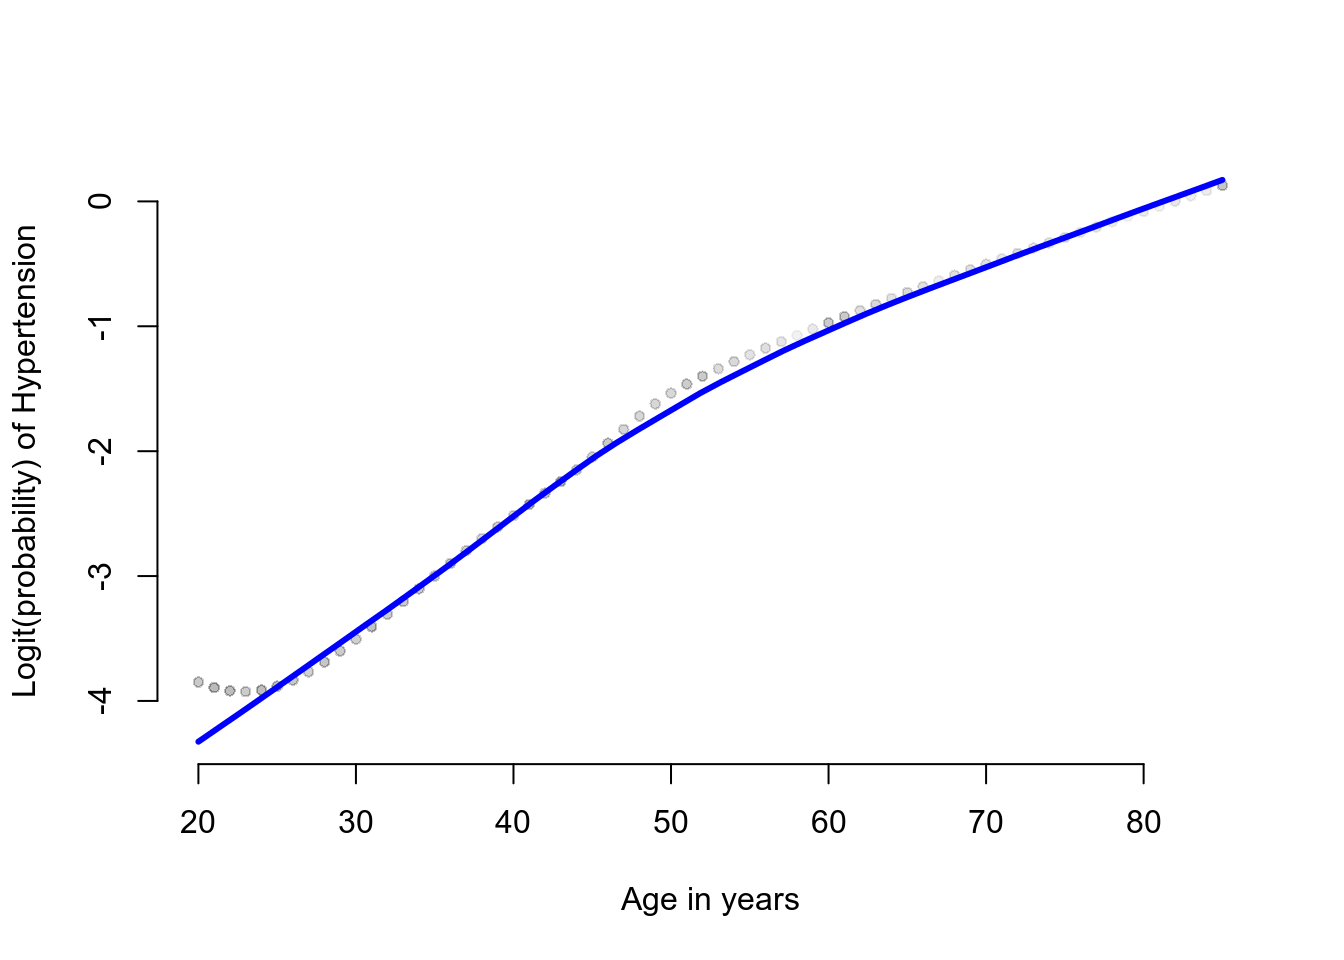 The loess plot of the observed proportin with hypertension against age. Span = 0.6